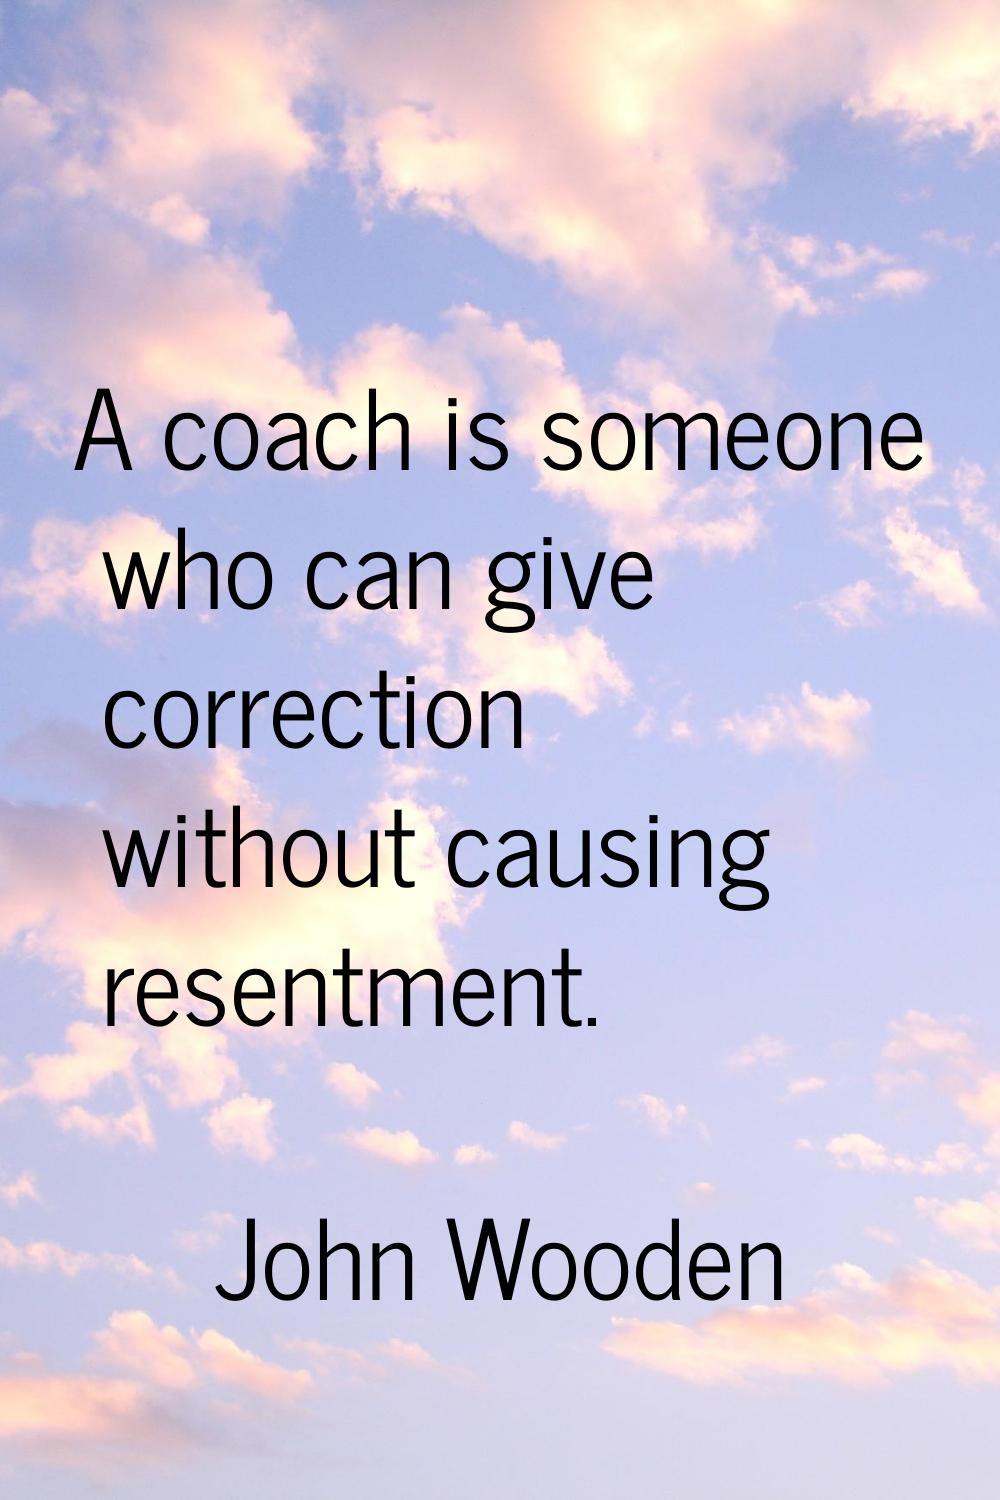 A coach is someone who can give correction without causing resentment.